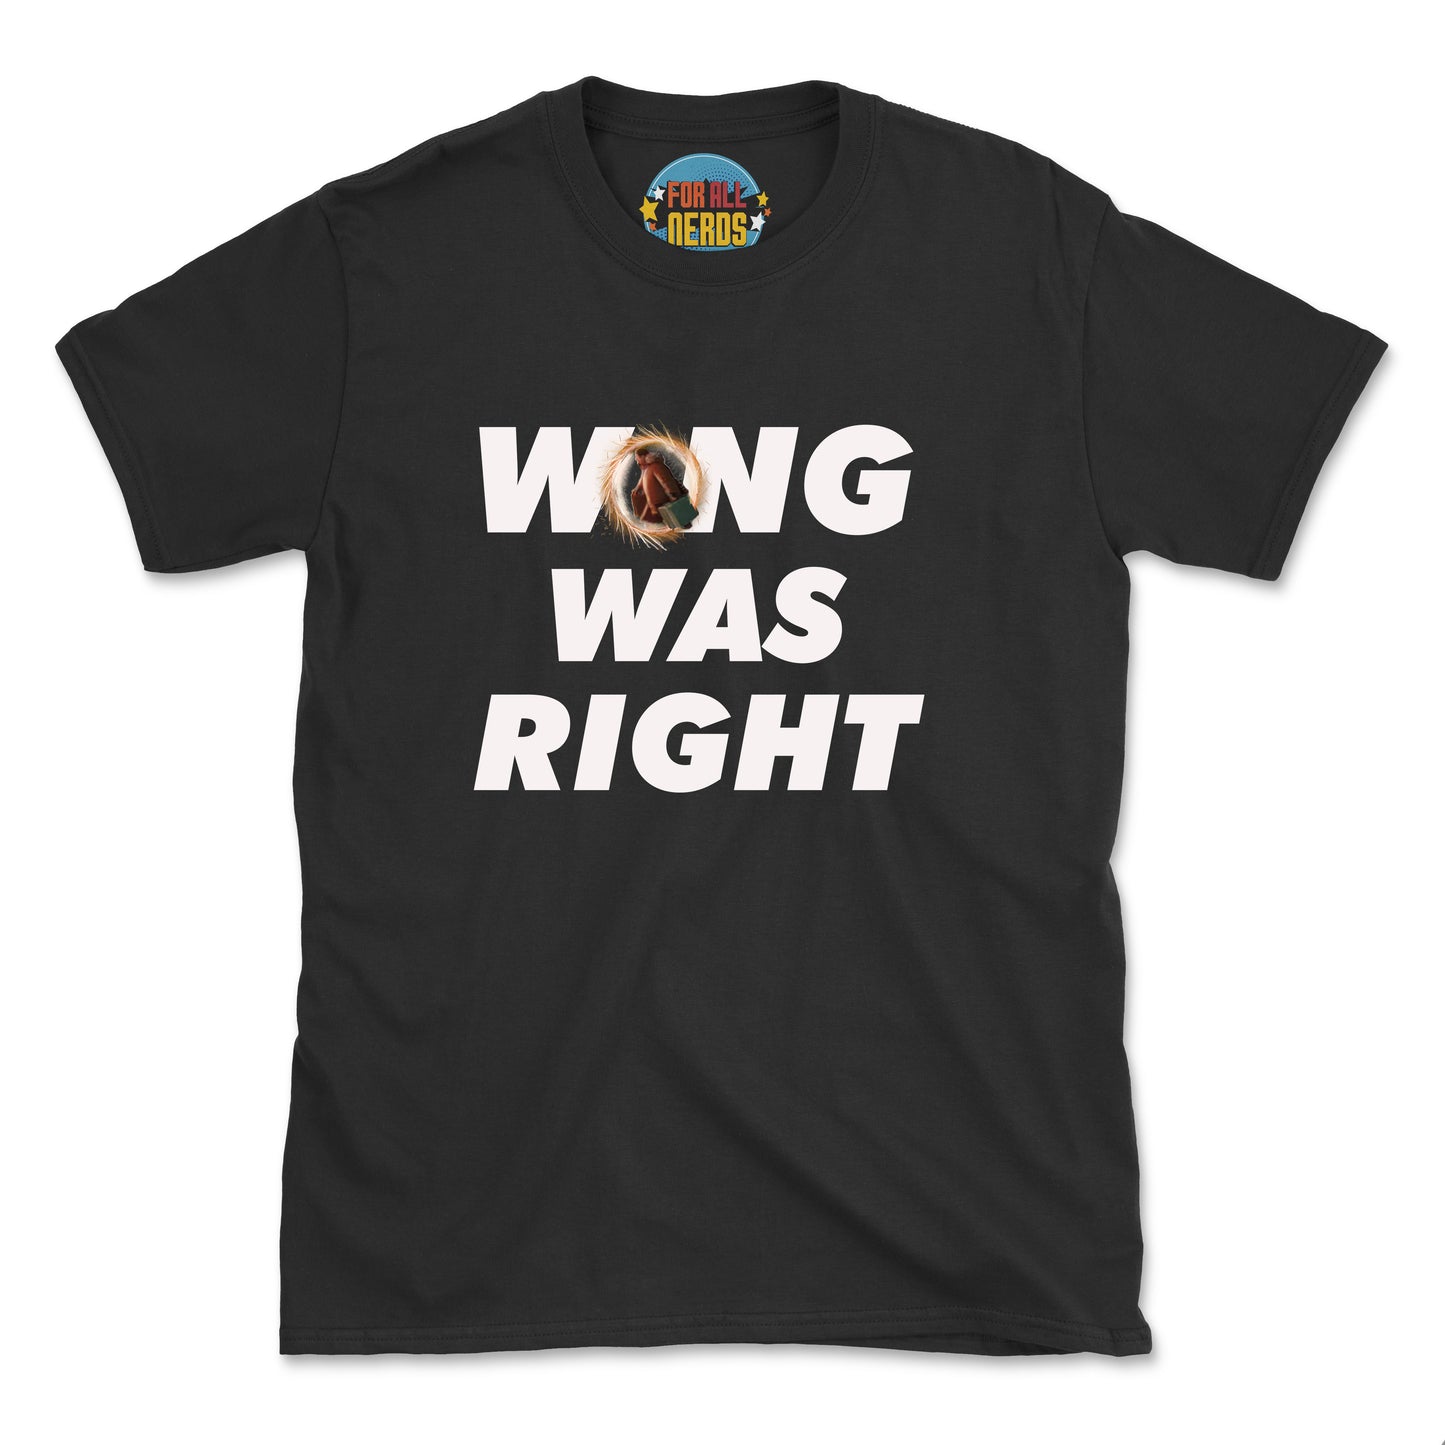 WONG WAS RIGHT (UNISEX FIT)